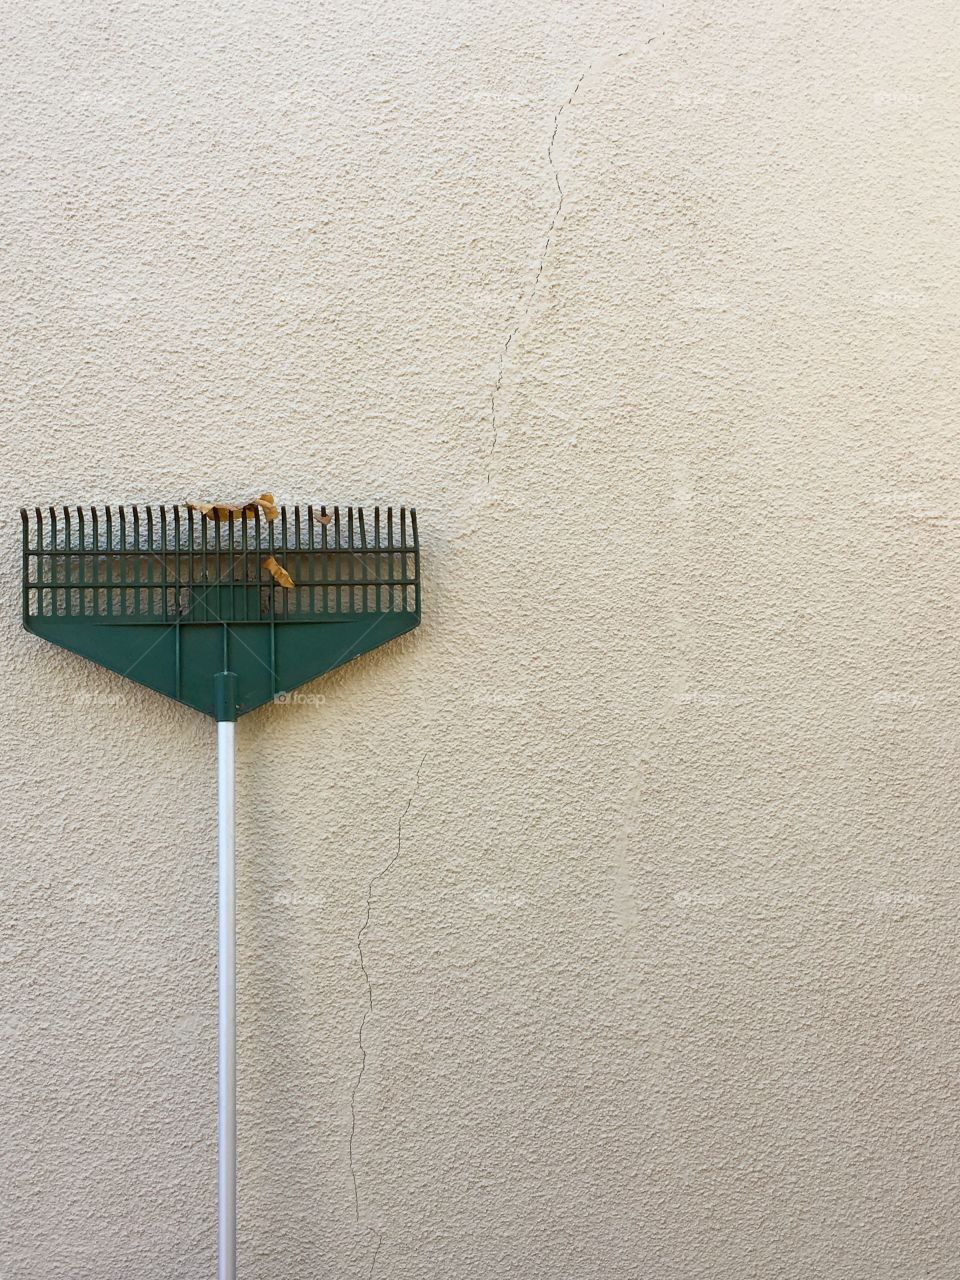 Green garden rake leaning up against cracked stucco exterior wall minimalist negative space and room
For text 